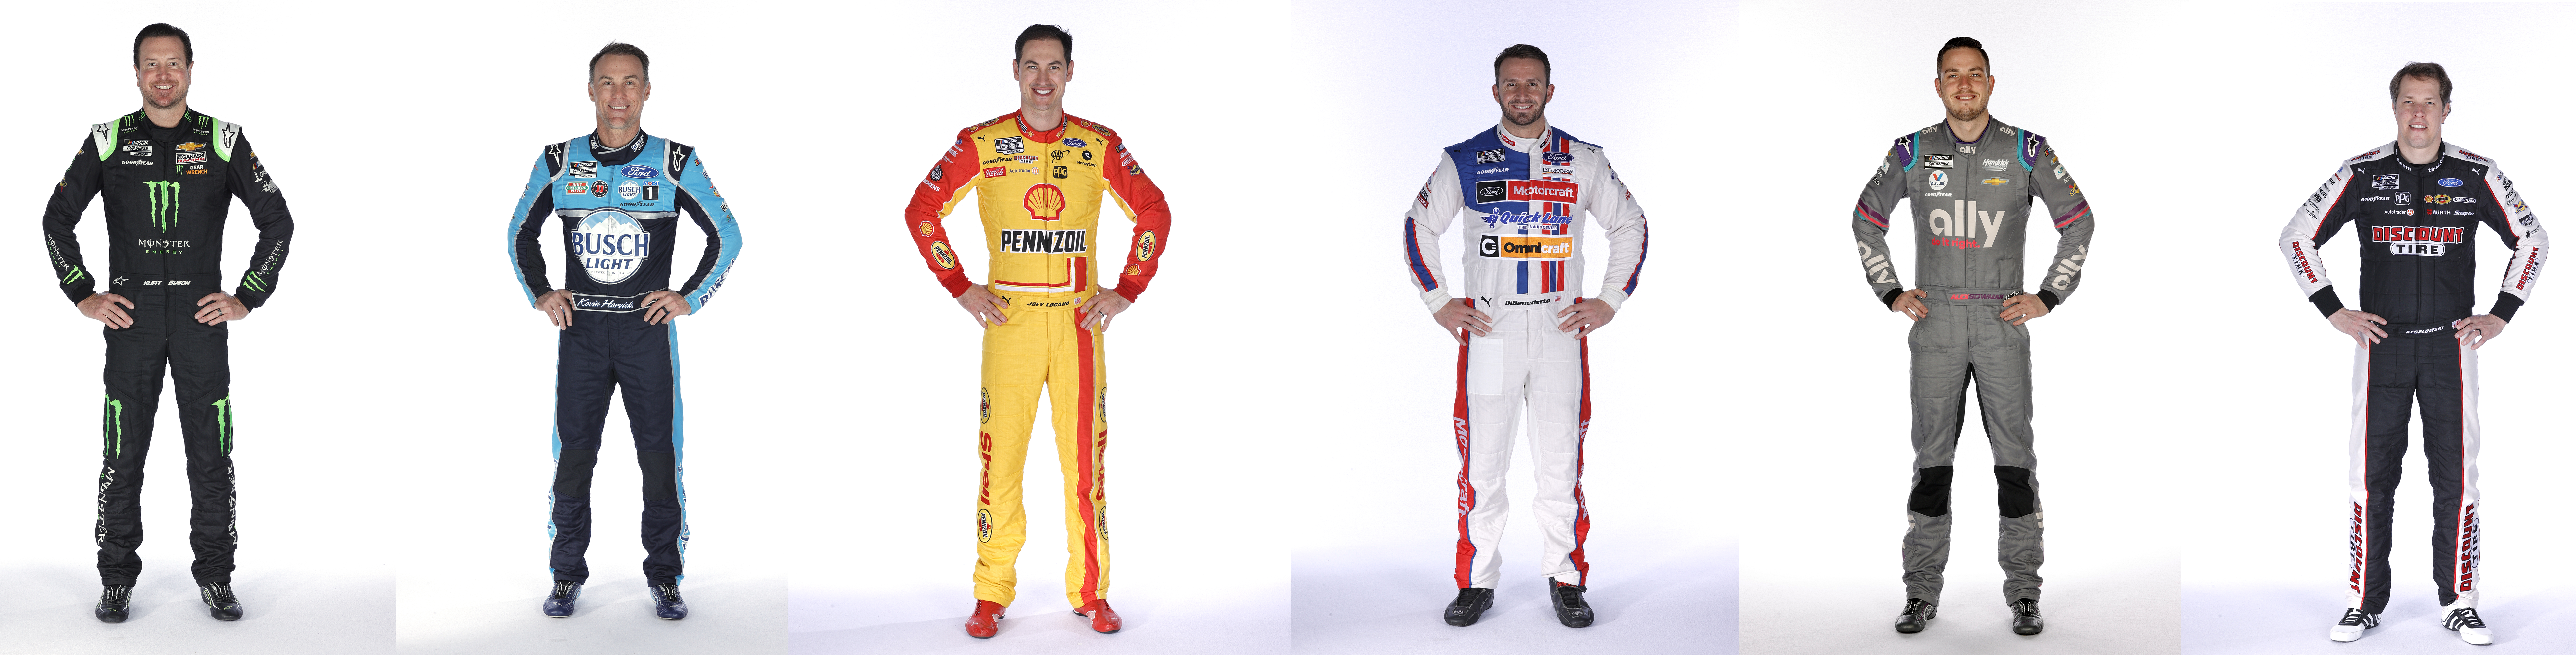 Will one of these six win Sunday's Pennzoil 400 at Las Vegas?